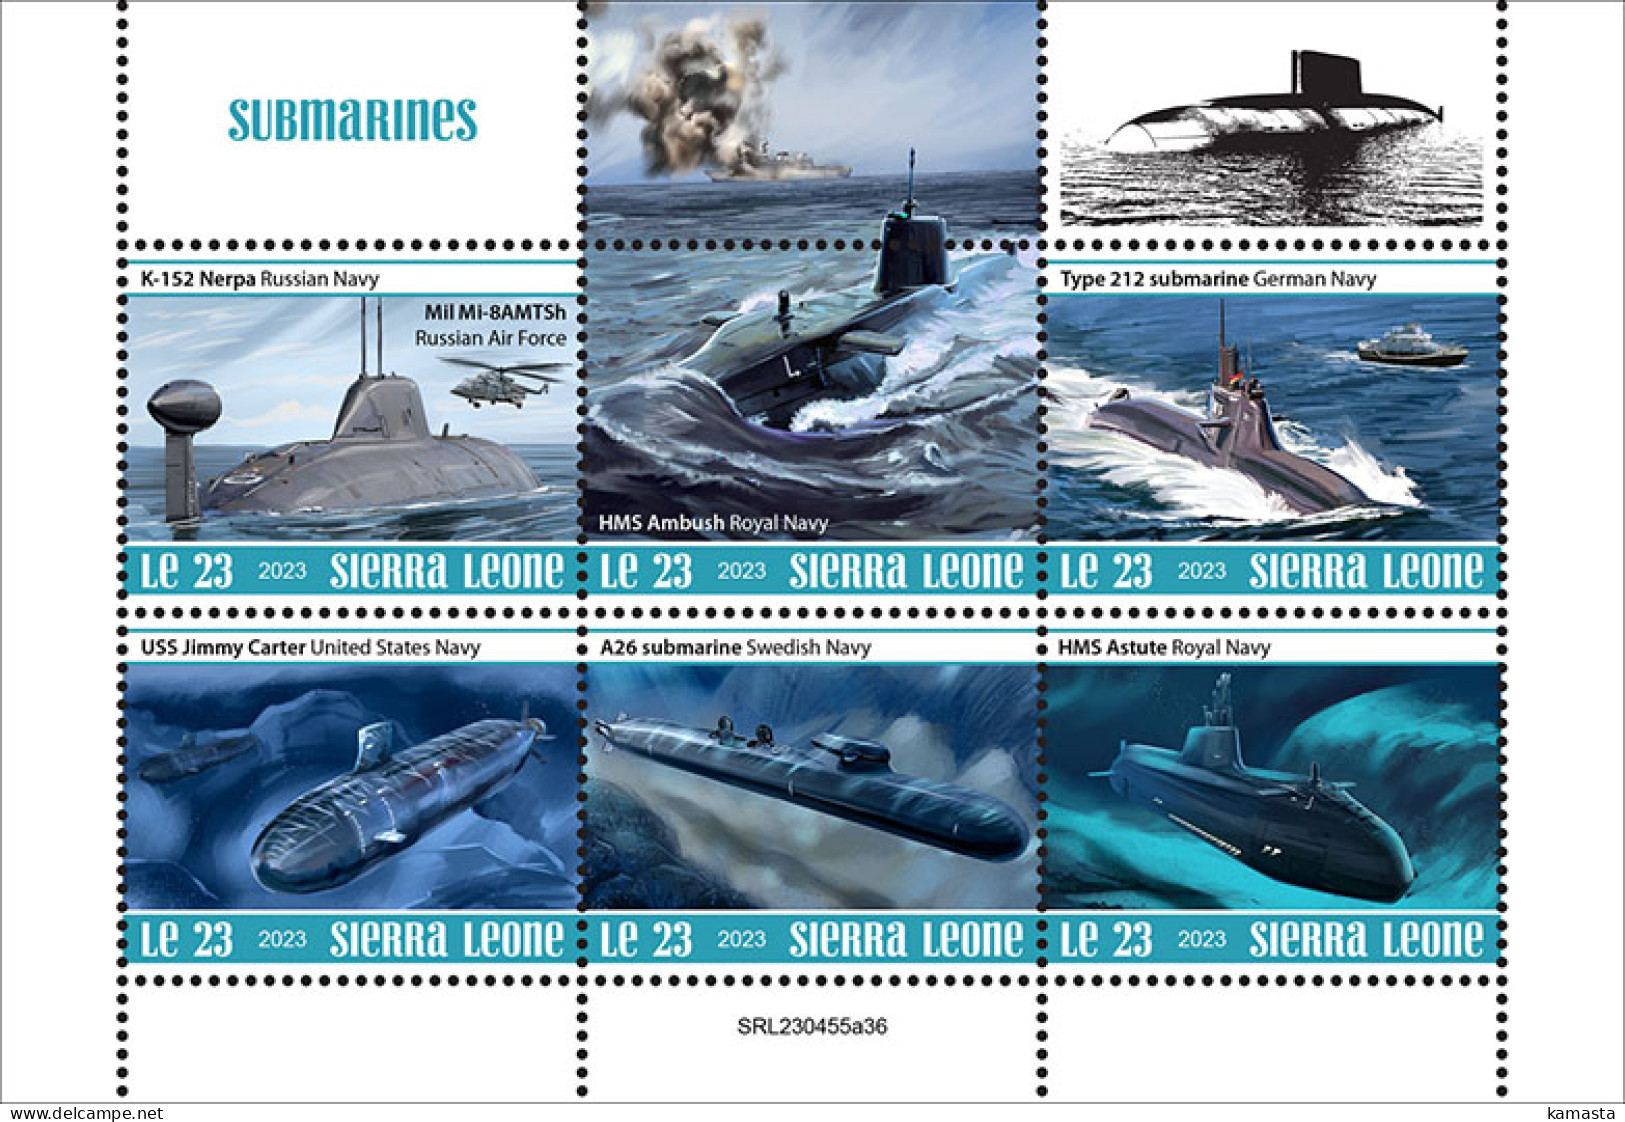 Sierra Leone  2023 Submarines. (445a36) OFFICIAL ISSUE - Submarinos